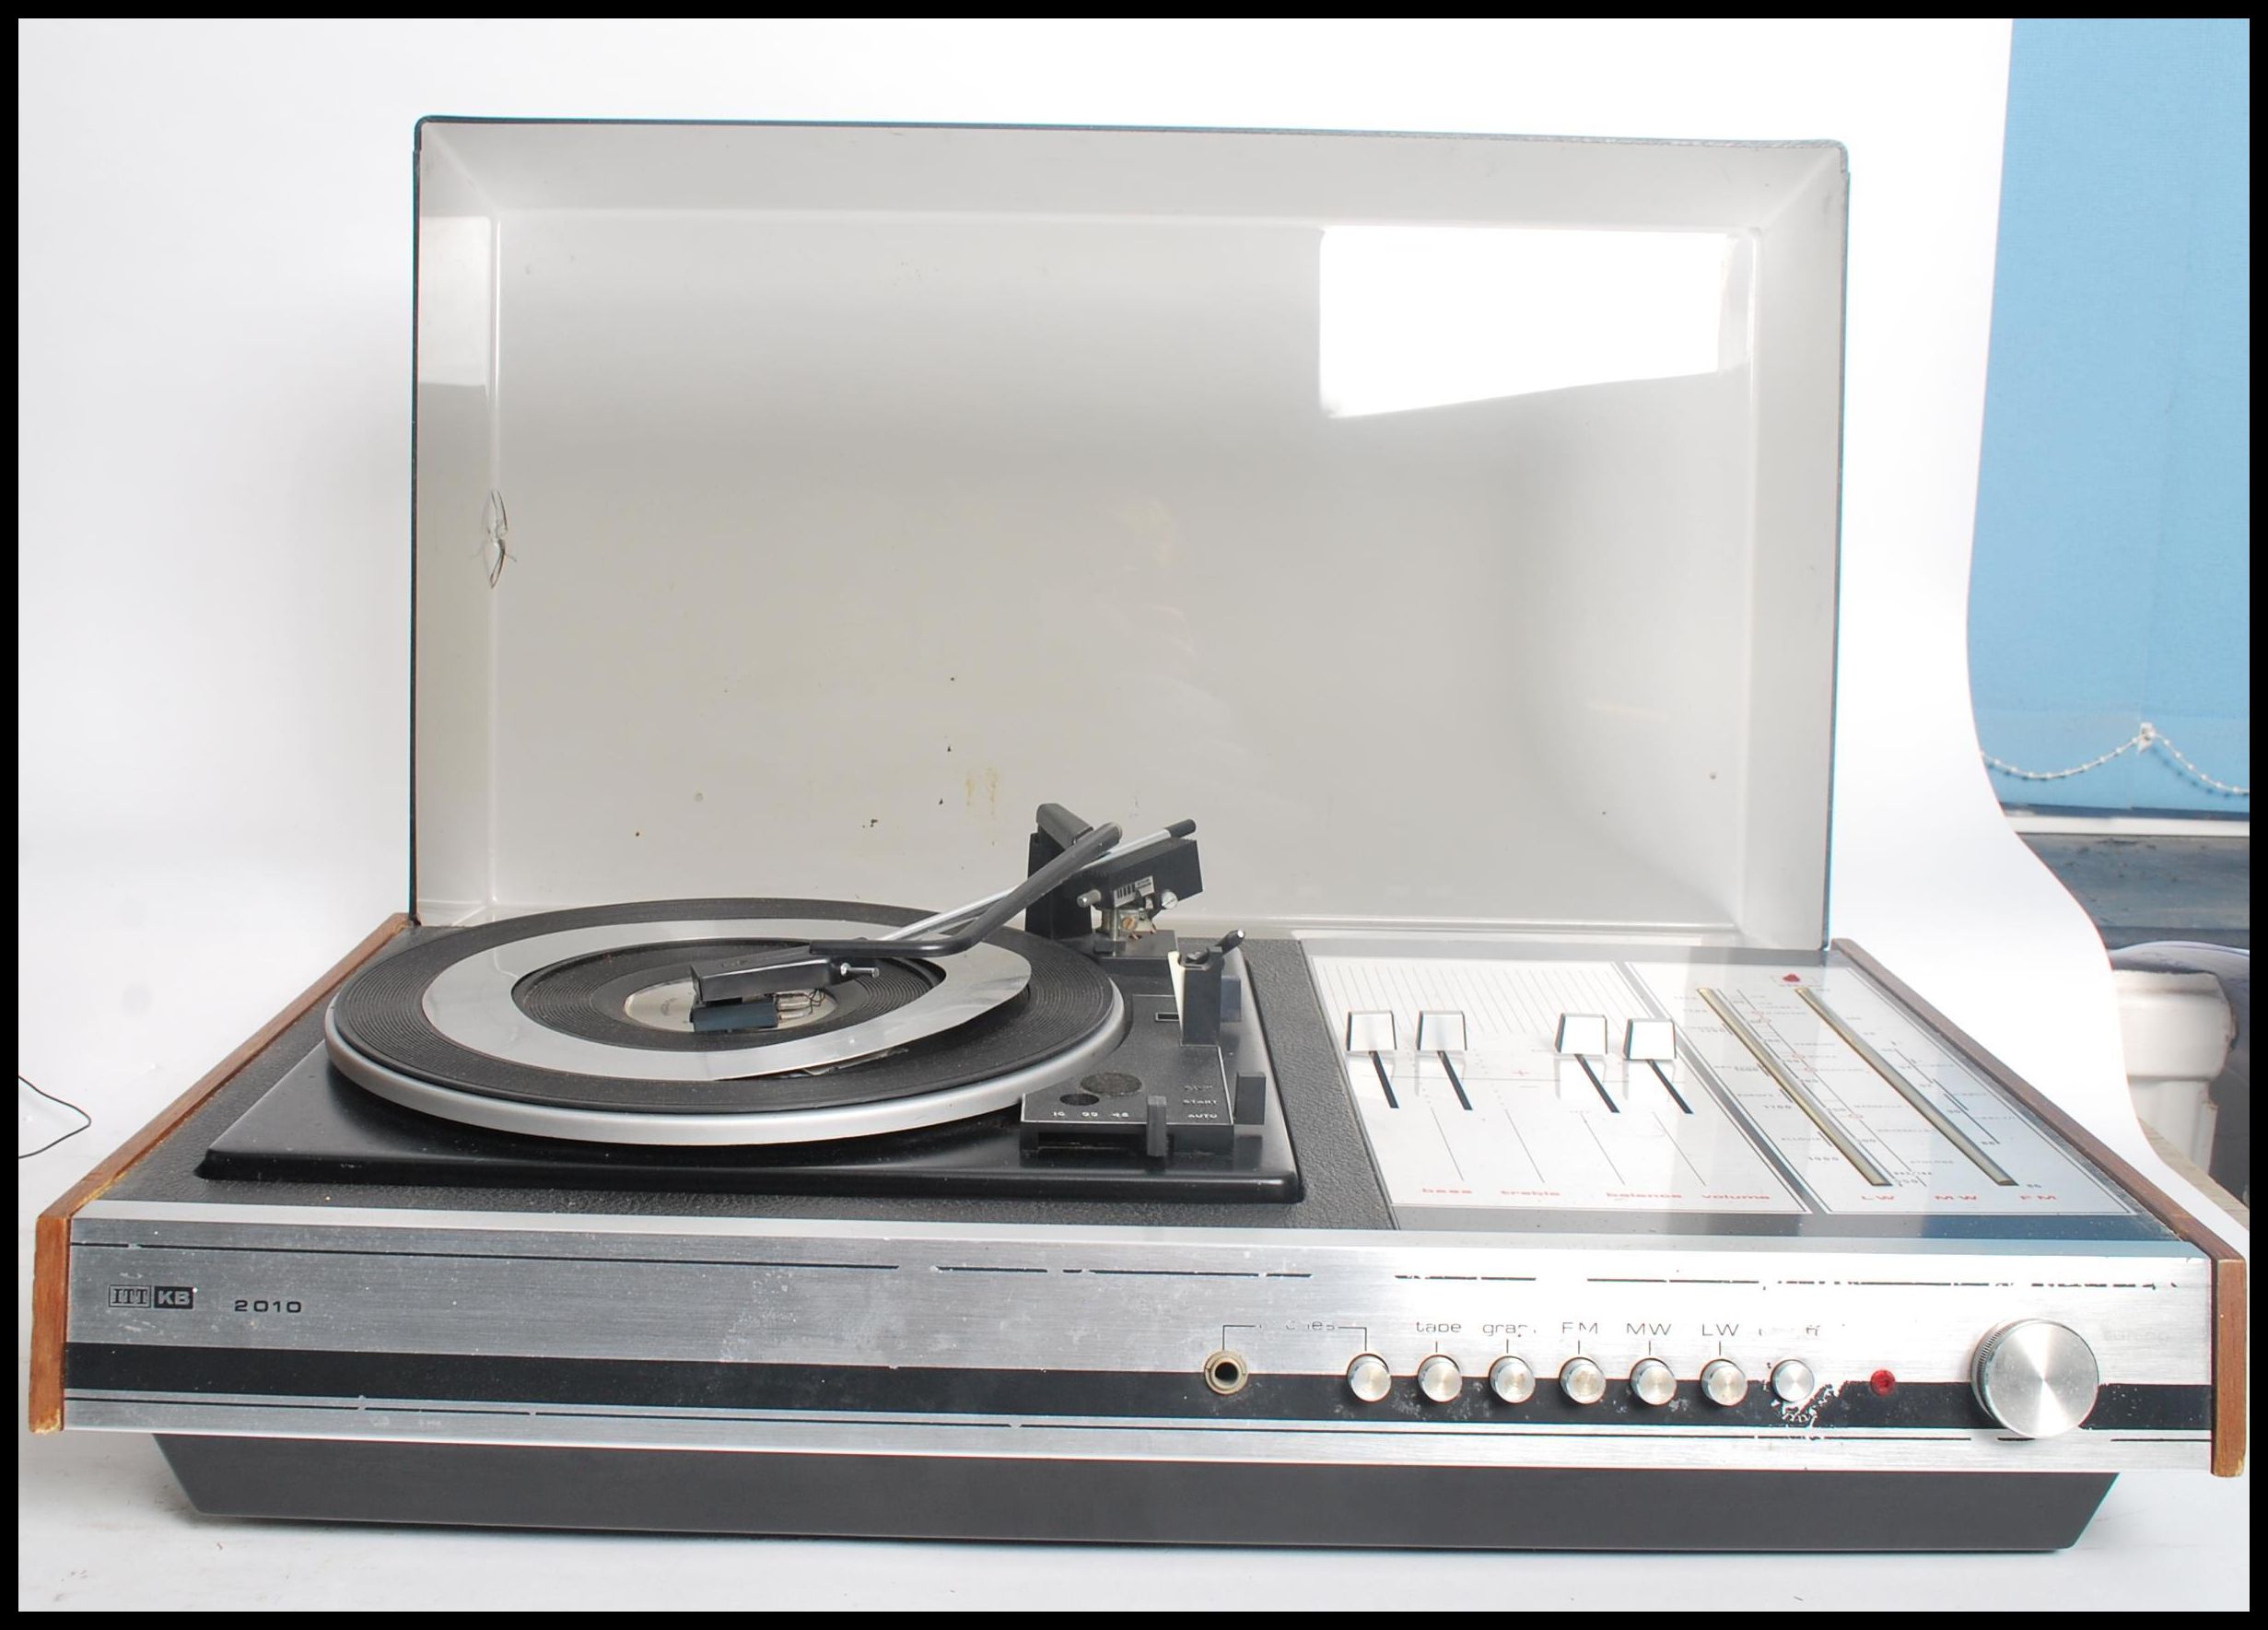 A vintage / retro 20th century stereo record player. ITT KB unit stereo, model KA.2010 with a BSR - Image 4 of 5